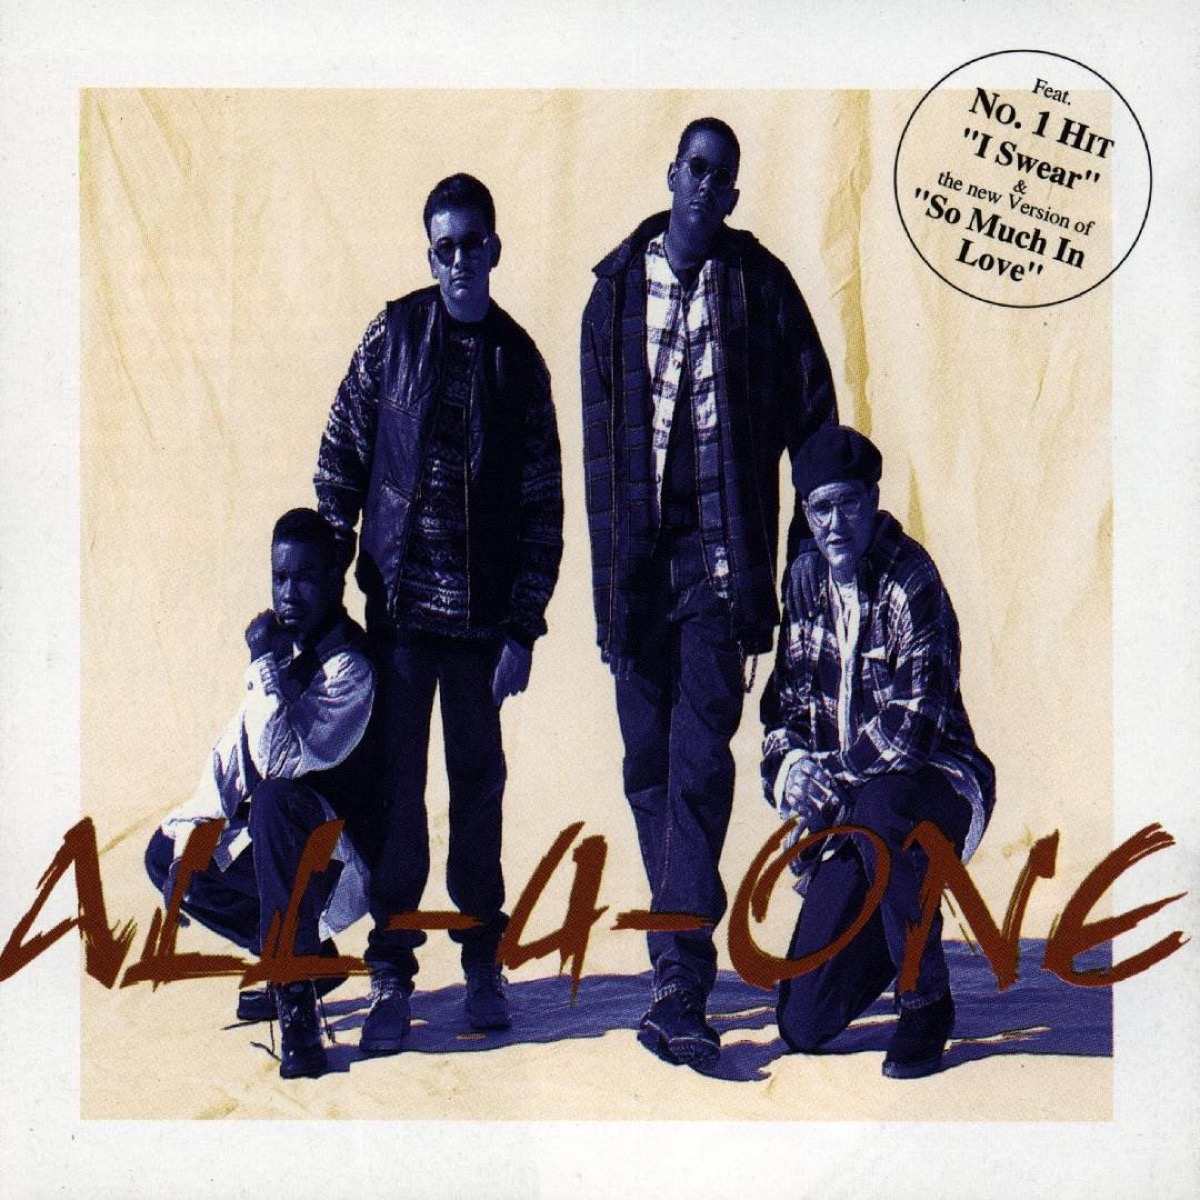 All-4-One self-titled album cover